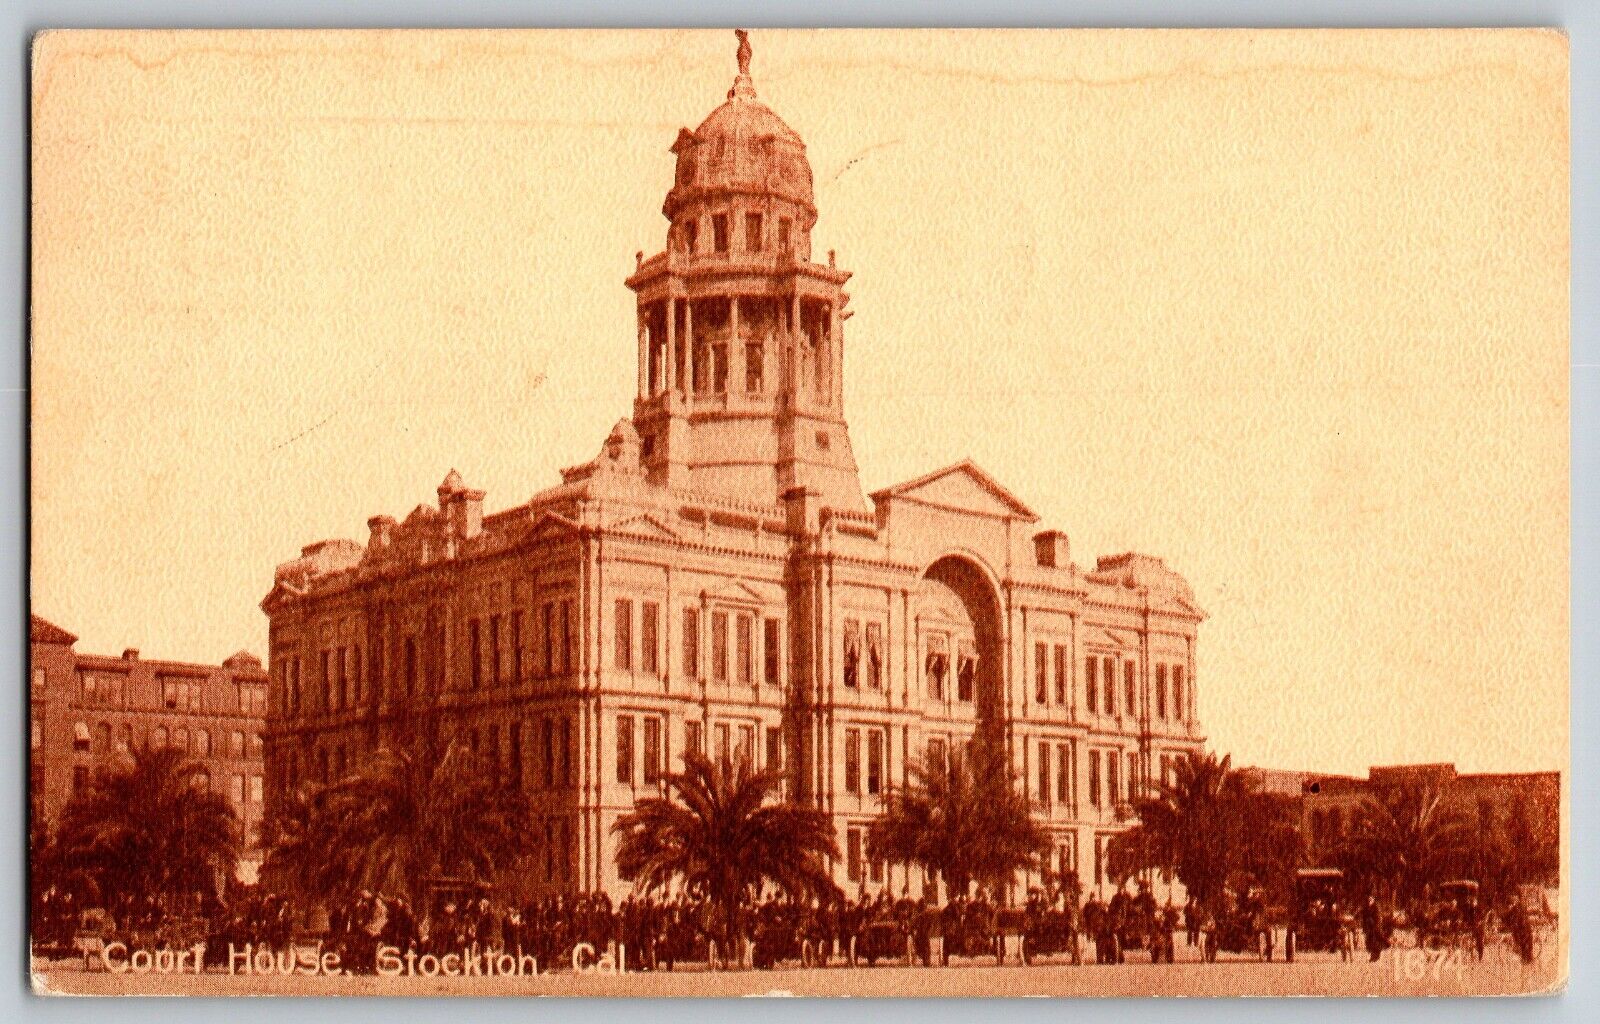 Stockton, California CA - Court House Building - Vintage Postcard - Posted